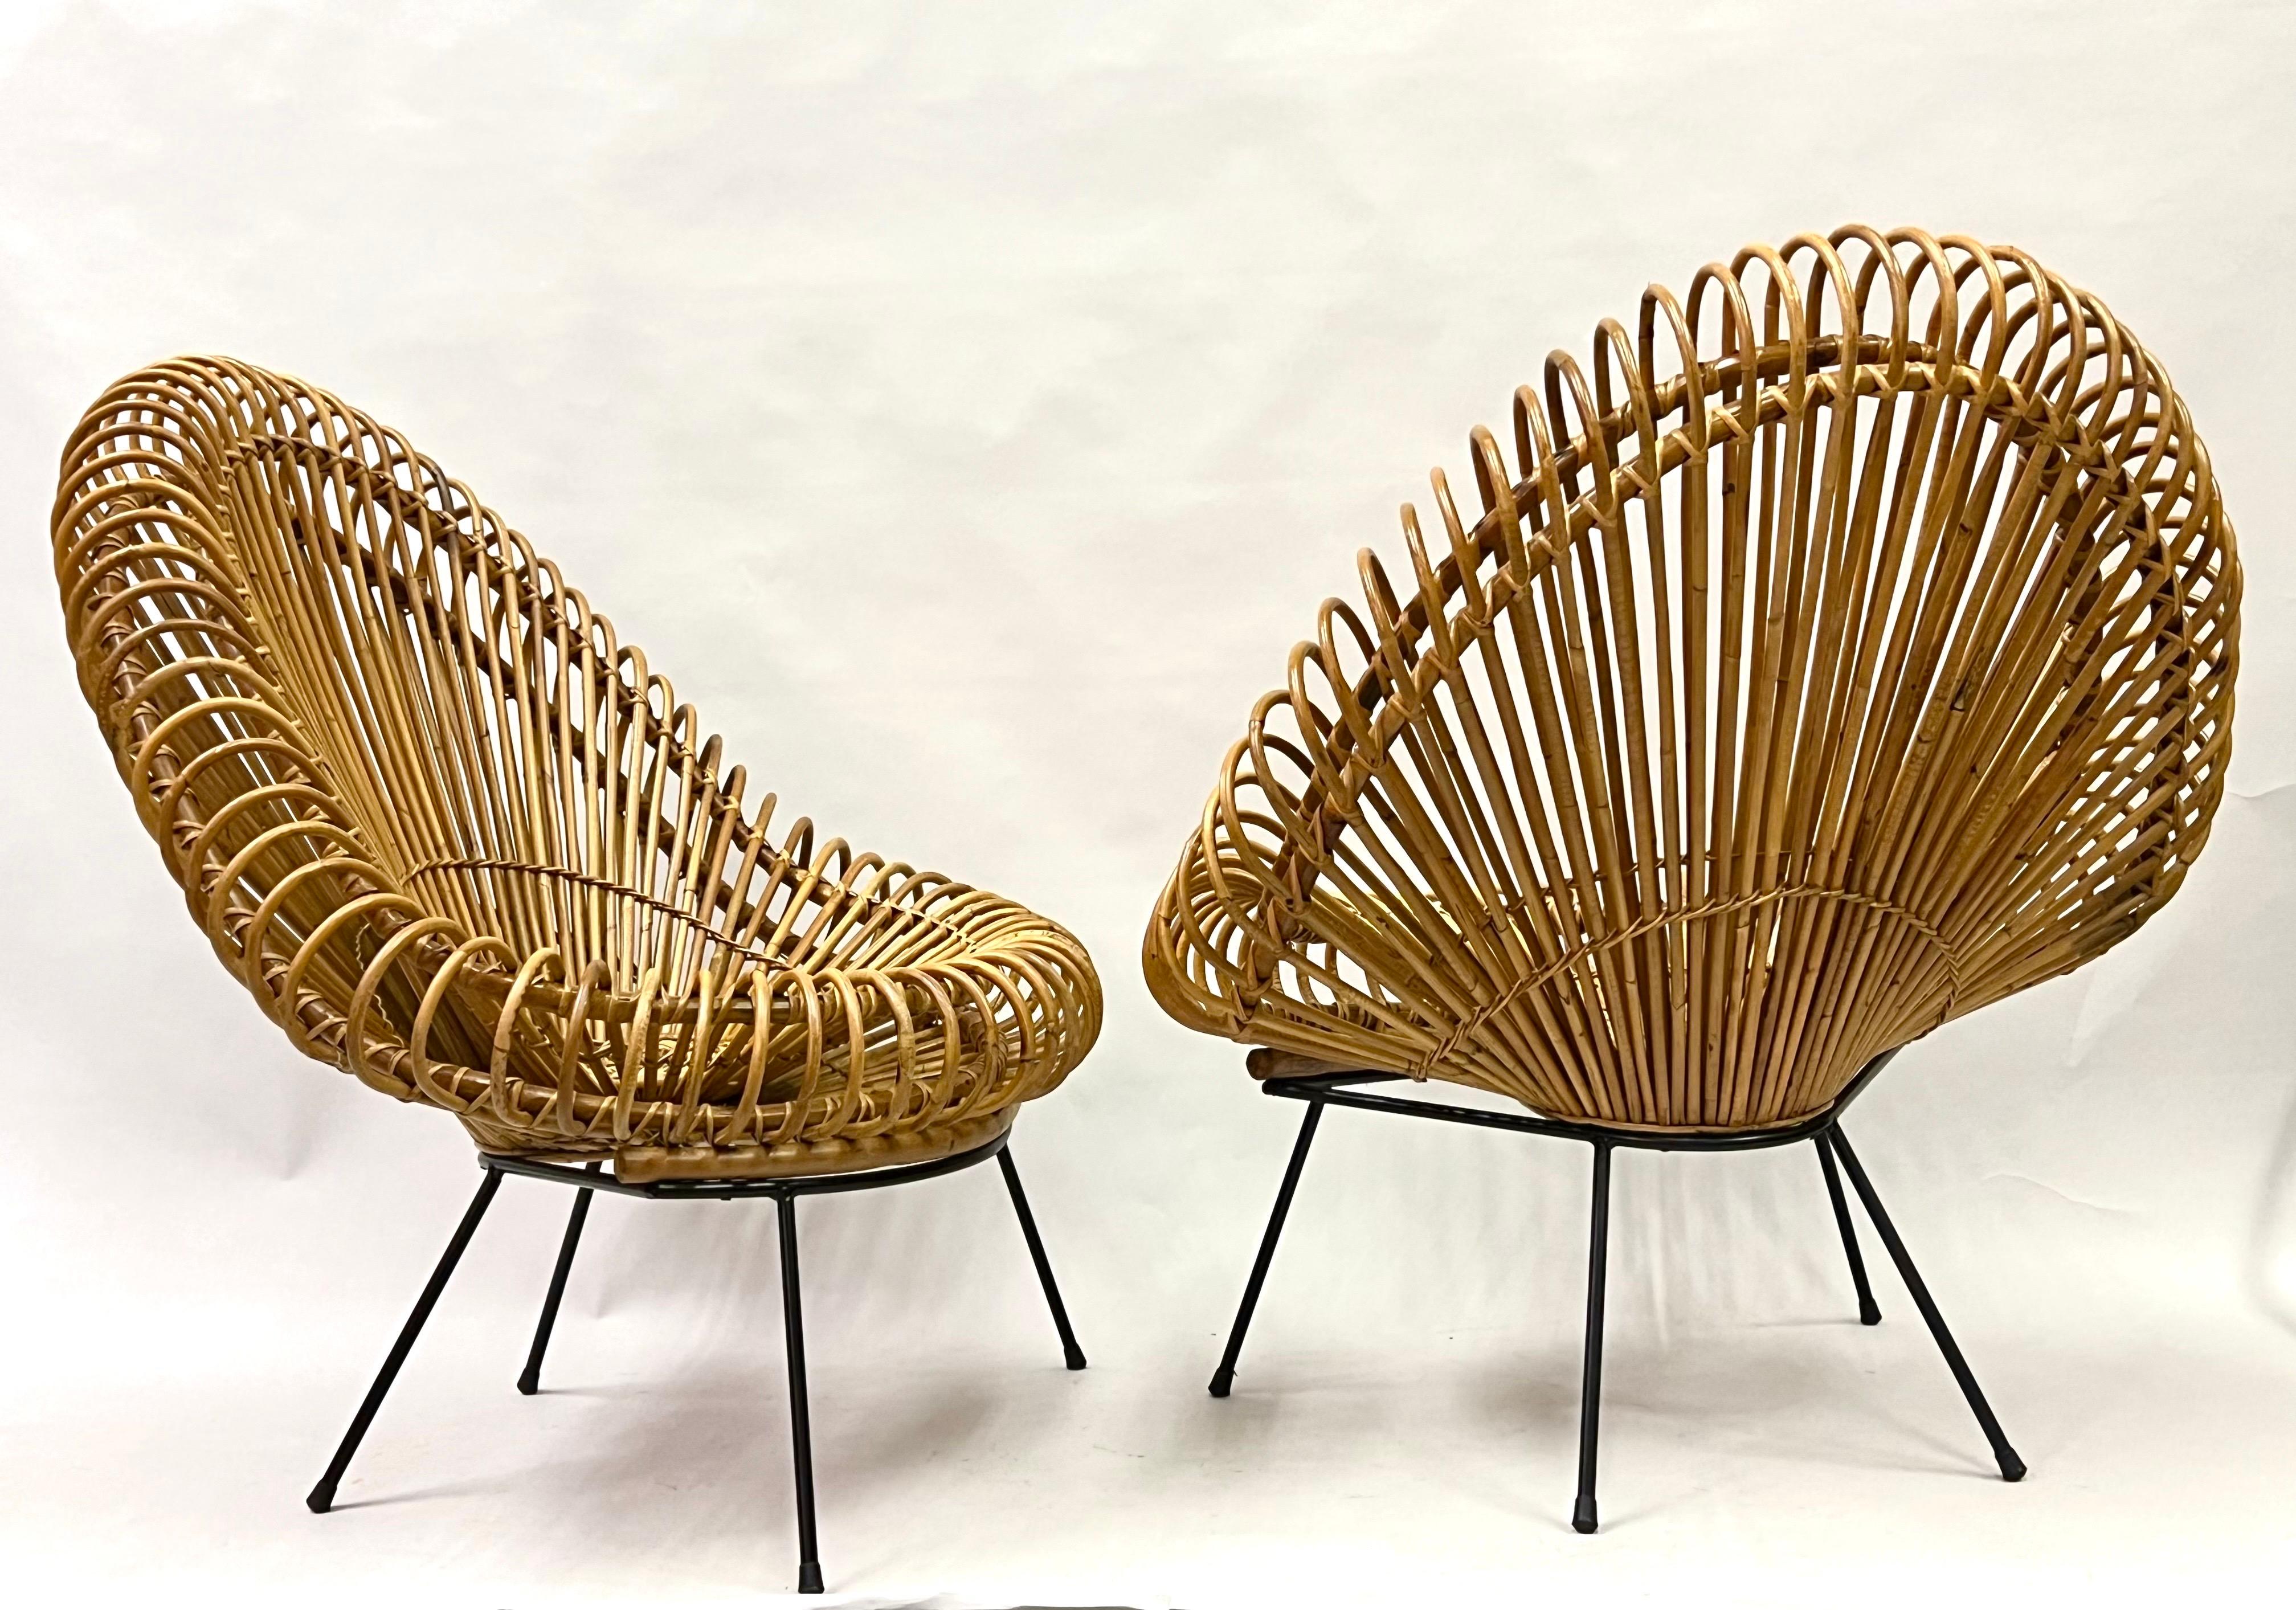 20th Century Pair of Large French Rattan Lounge Chairs by Janine Abraham & Dirk Jan Roi For Sale